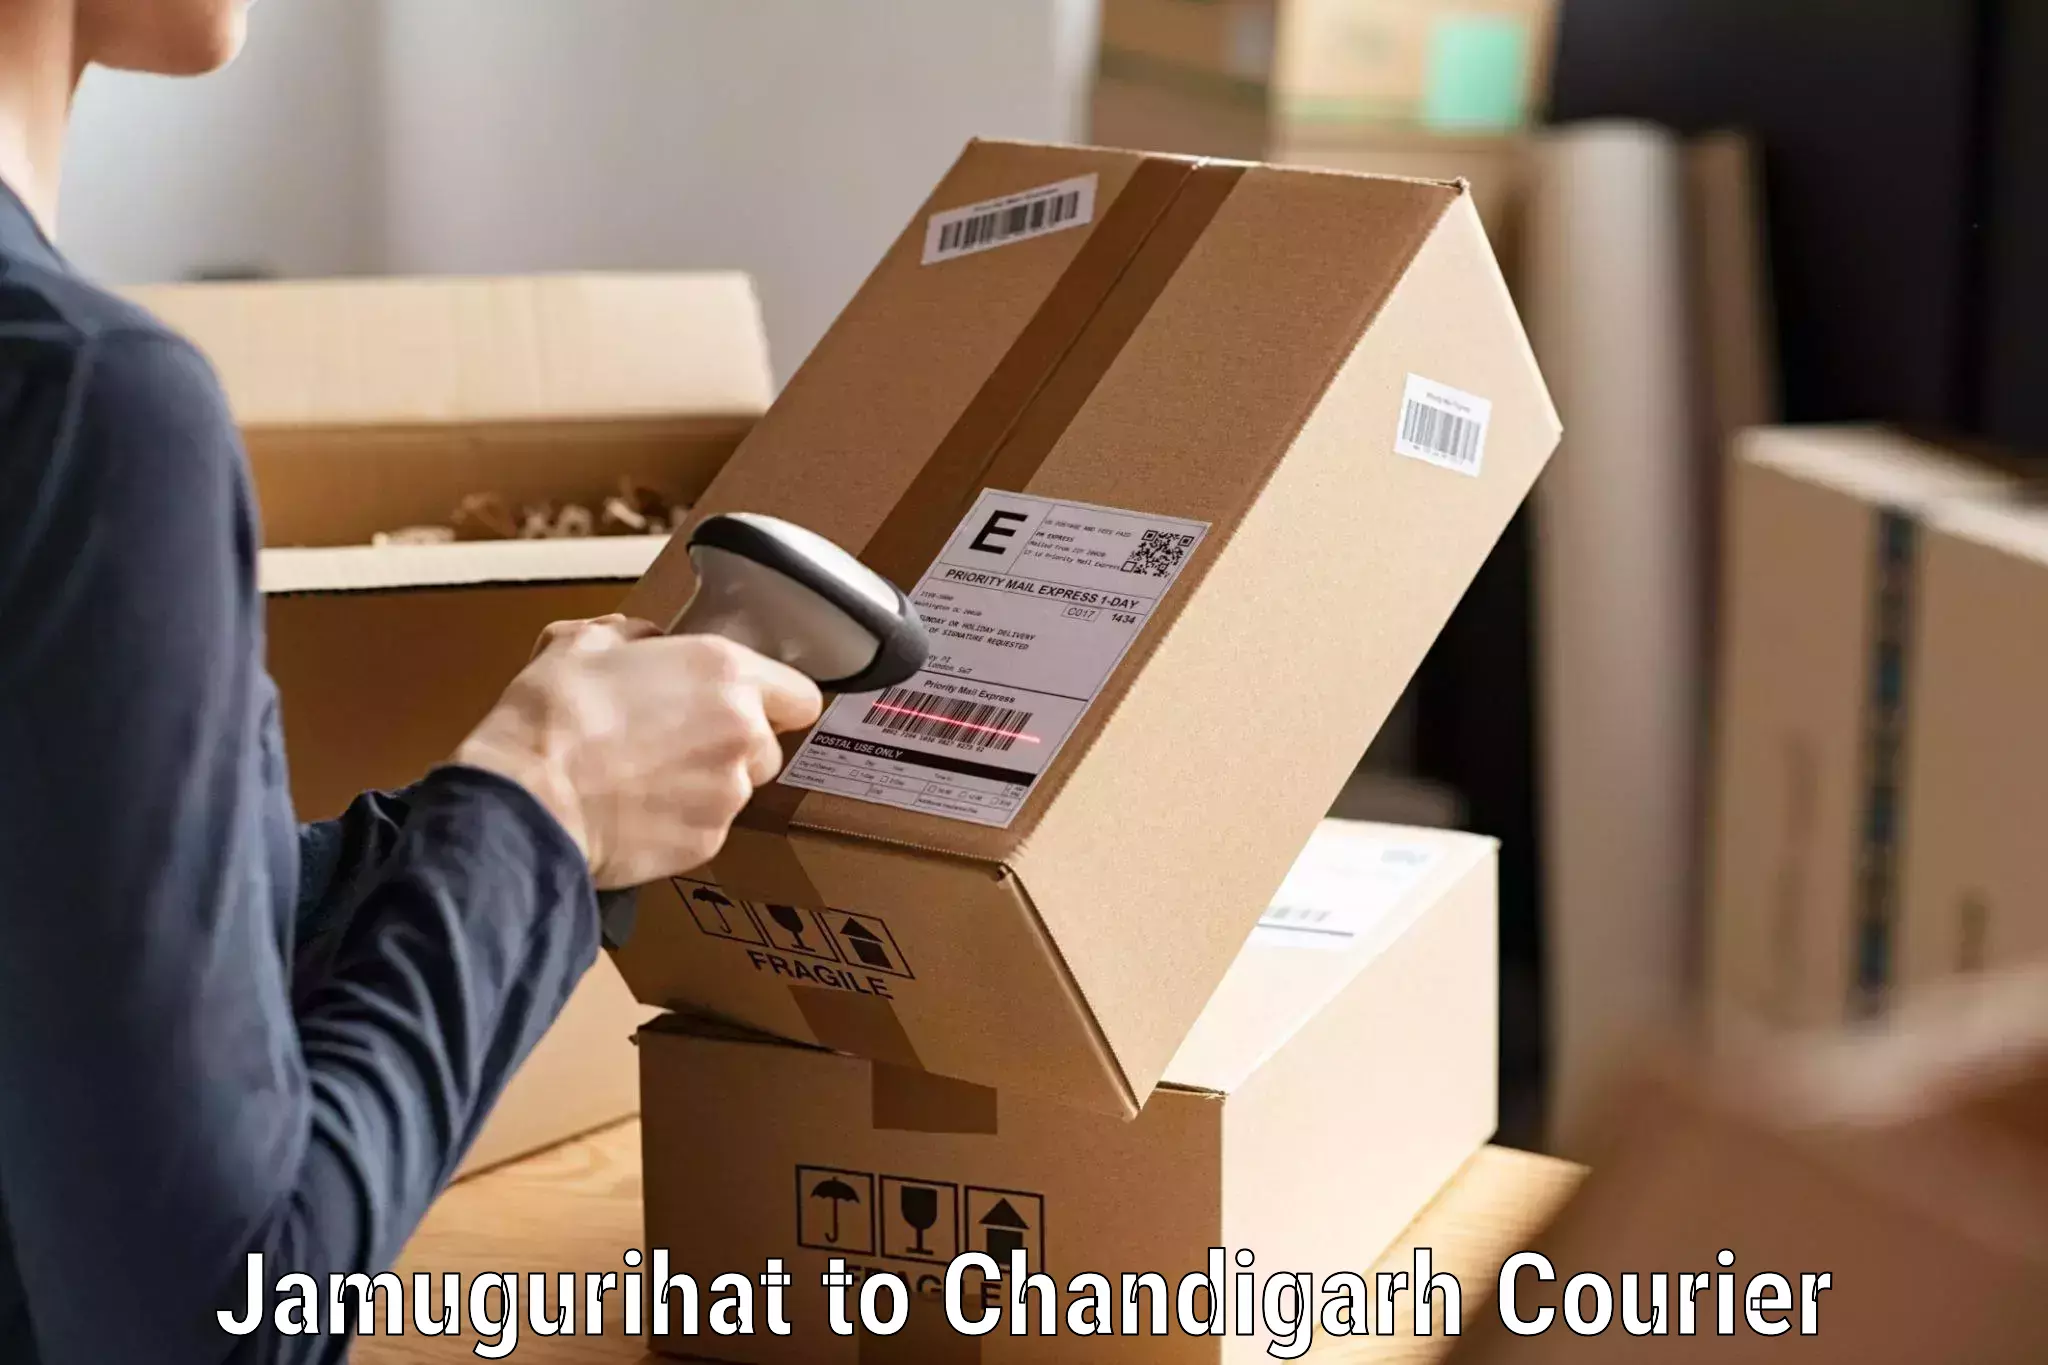 Global courier networks Jamugurihat to Chandigarh